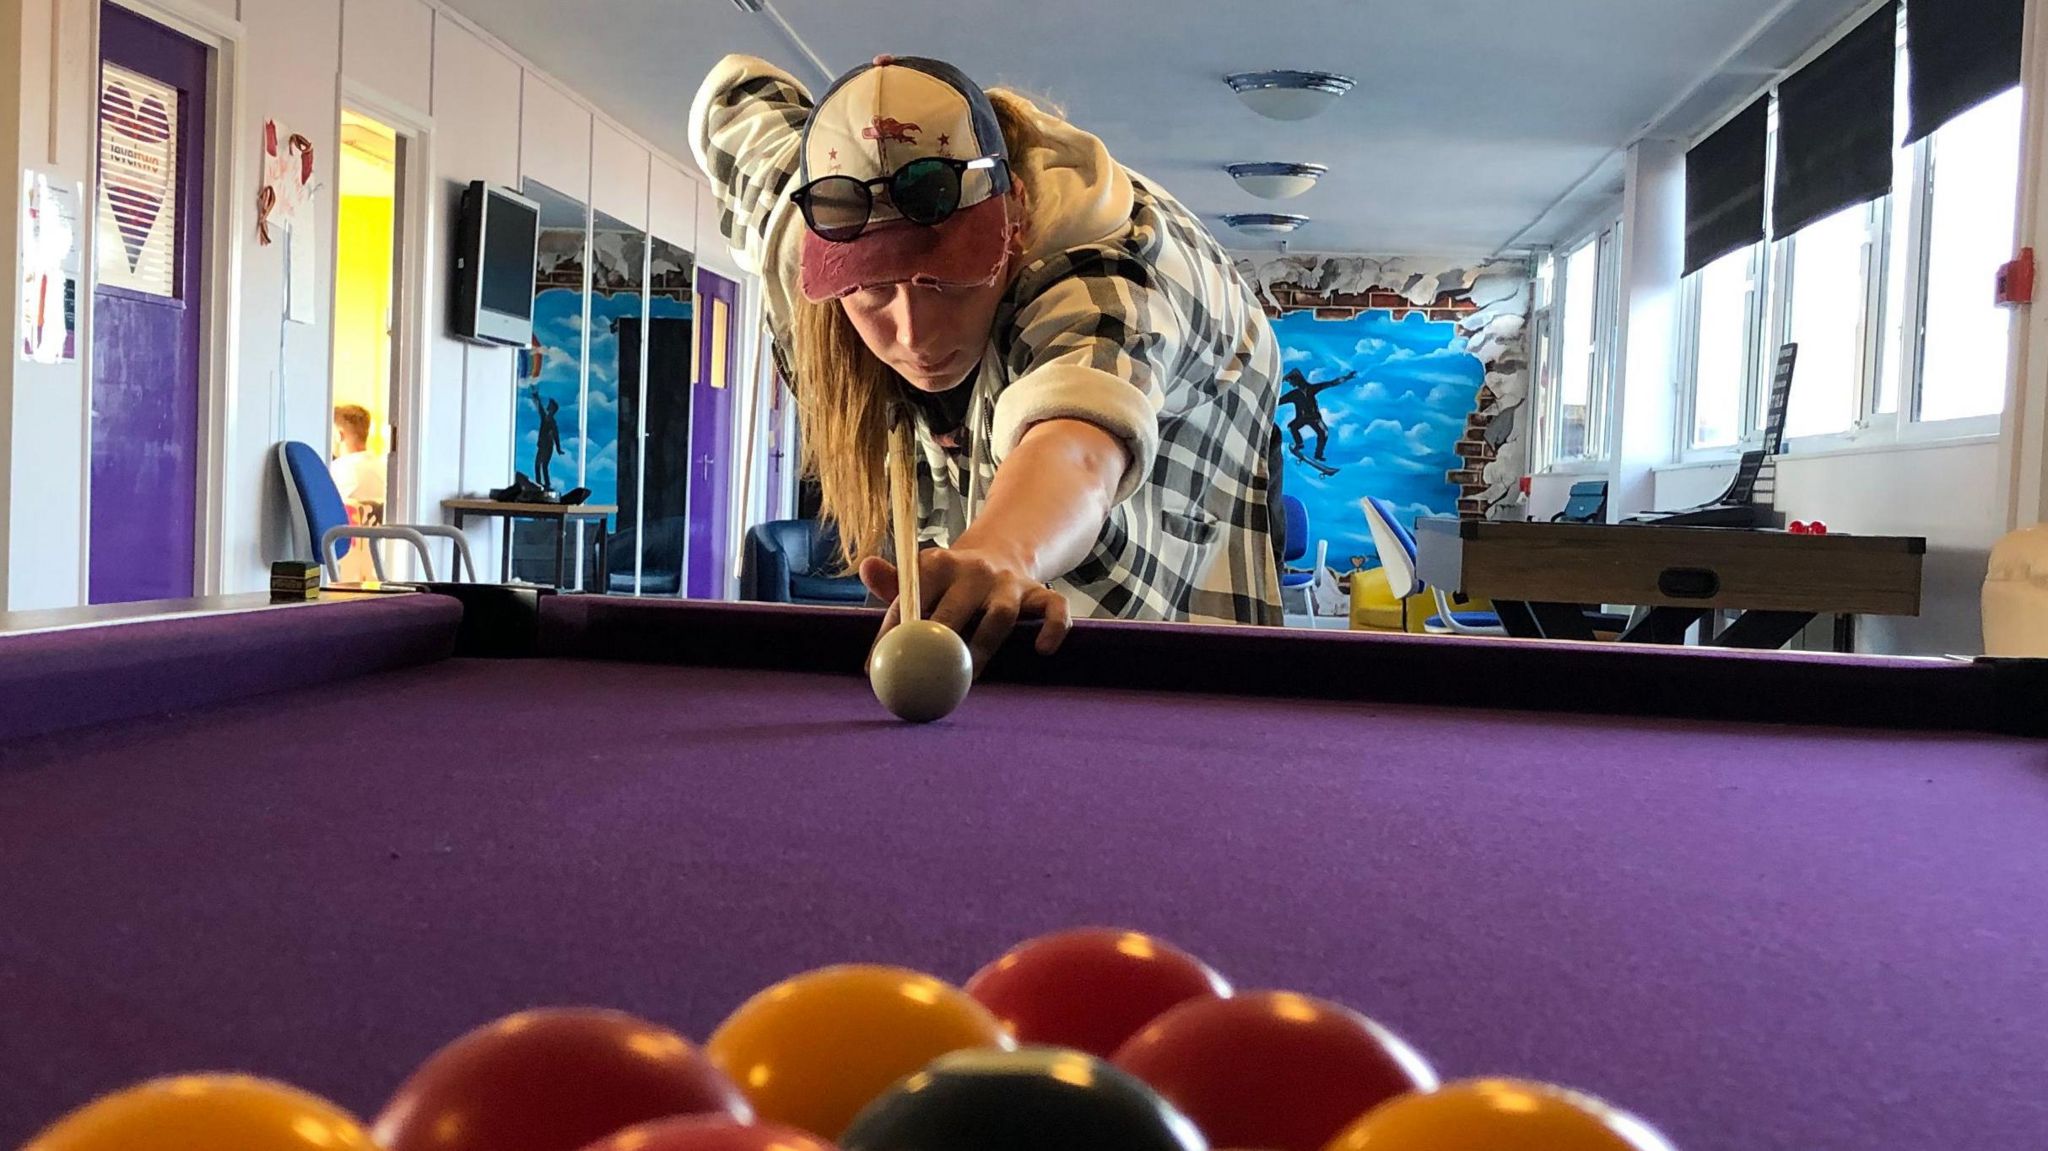 A young man with long hair and a cap lines up a break on a pool table